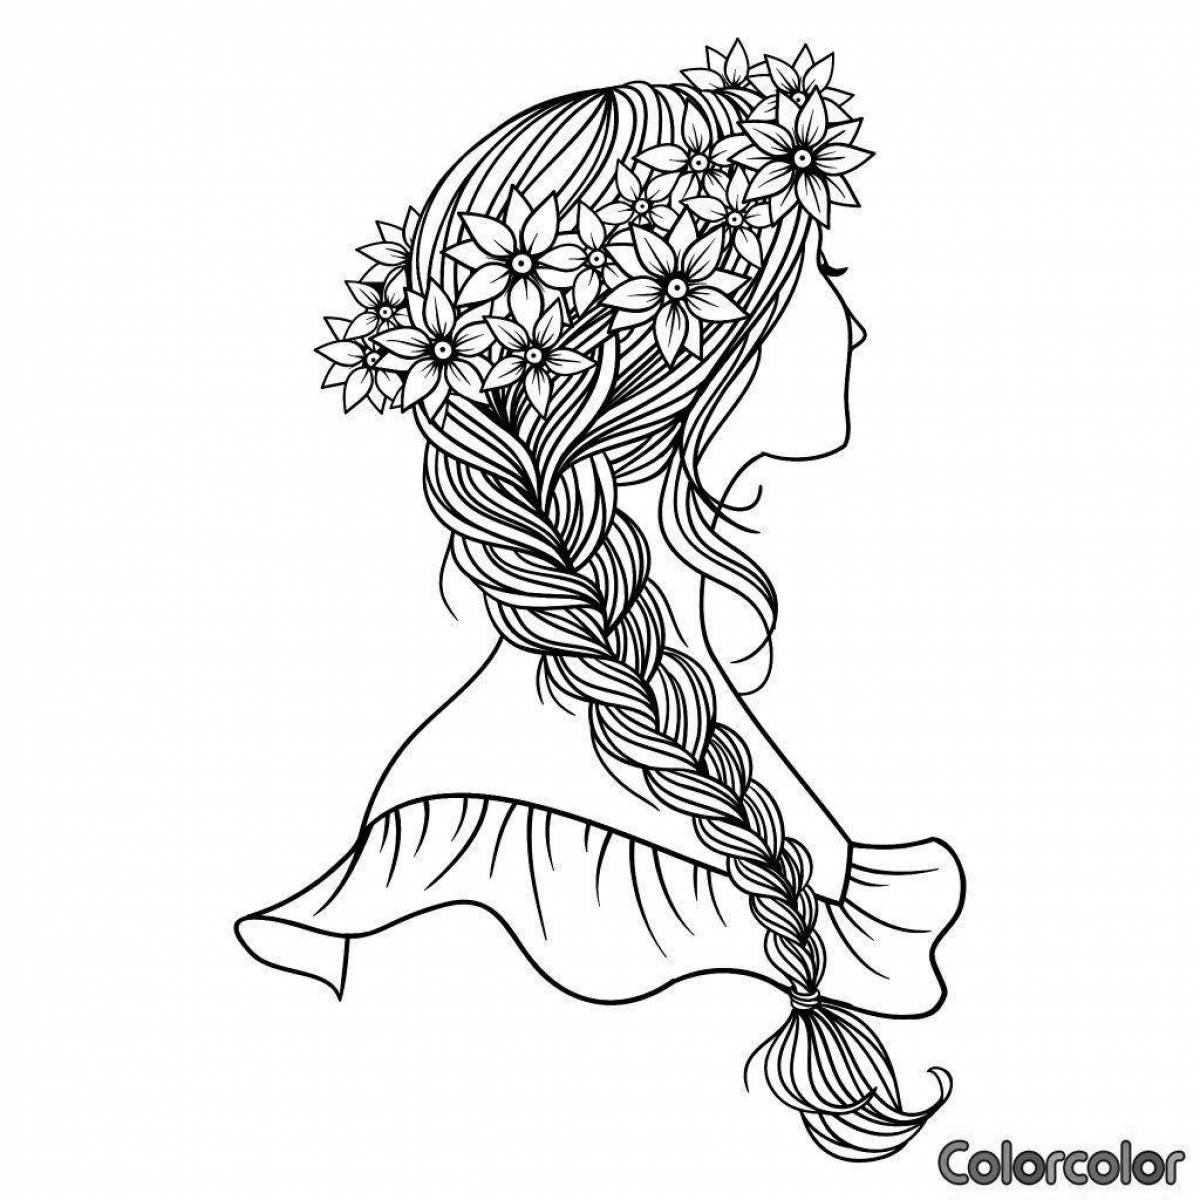 Nice girl's hair coloring page